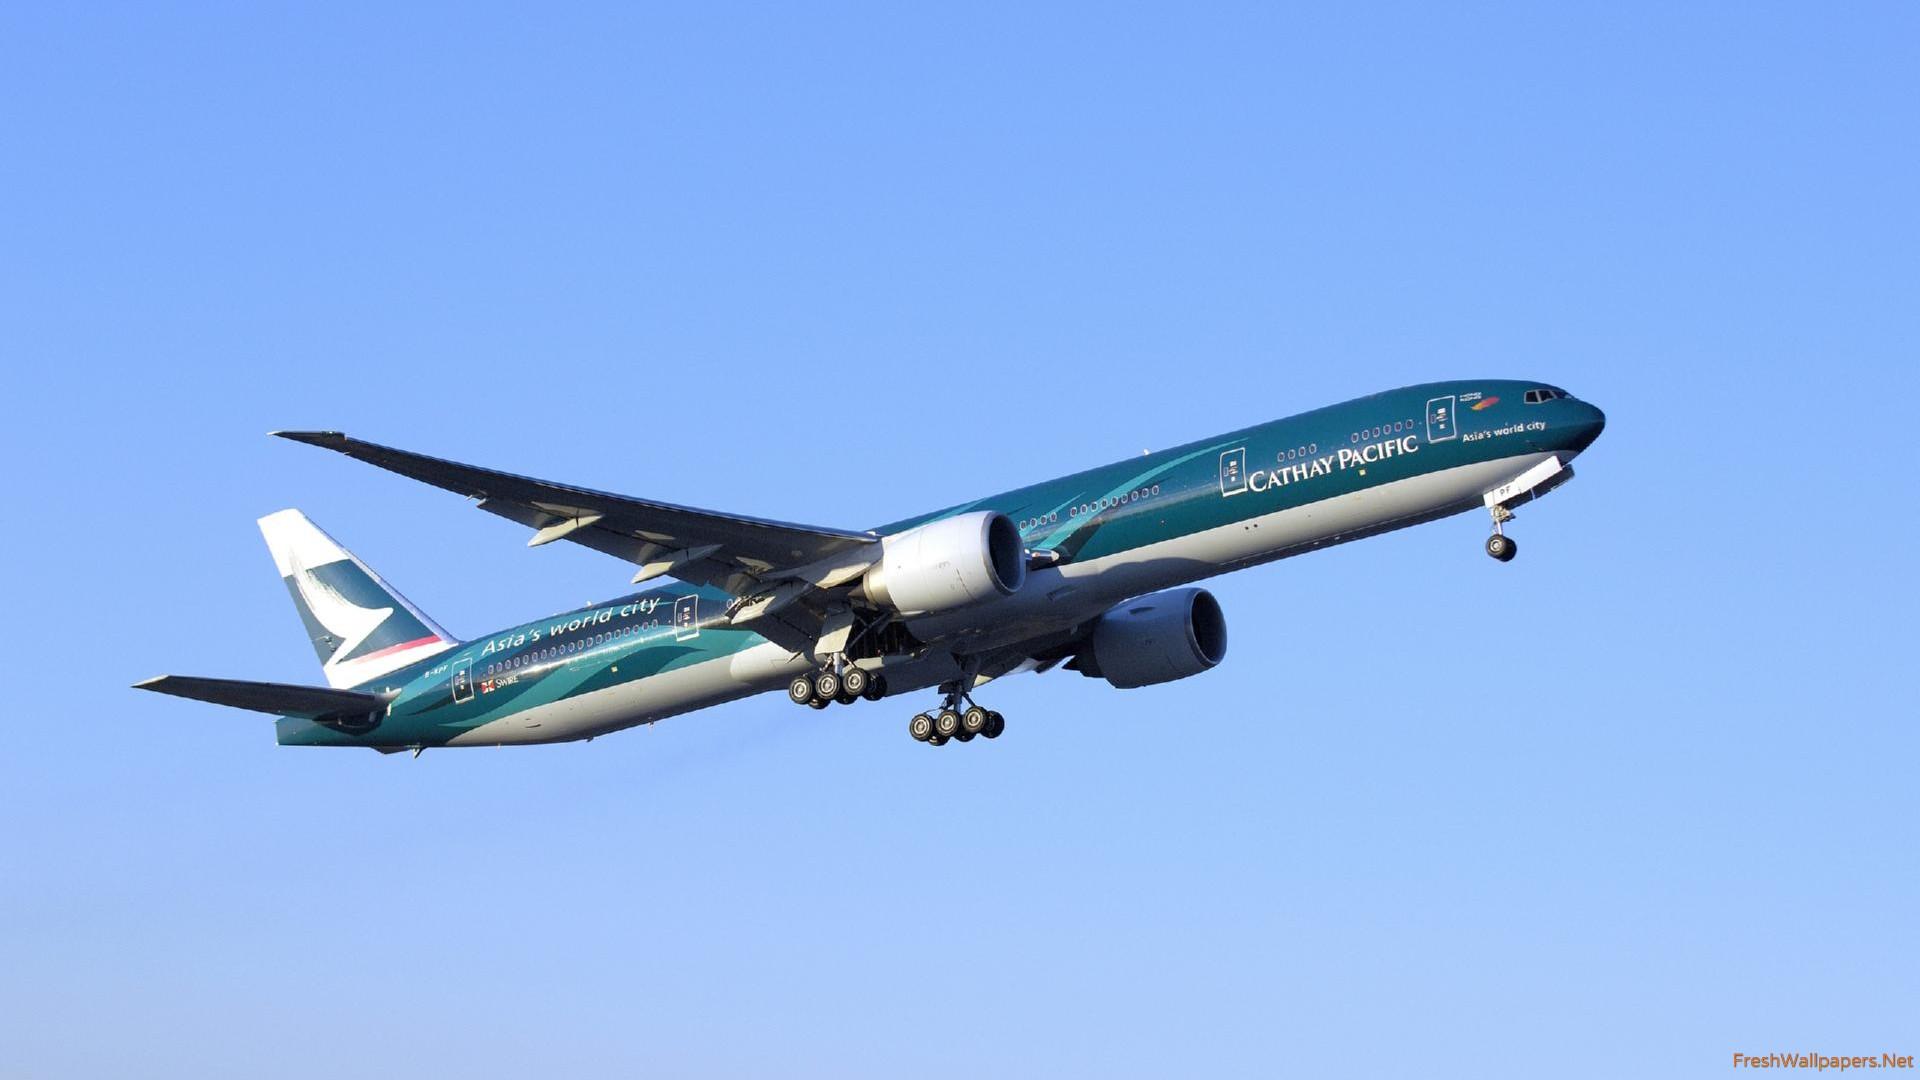 Cathay Pacific Boeing 777 in flight wallpaper